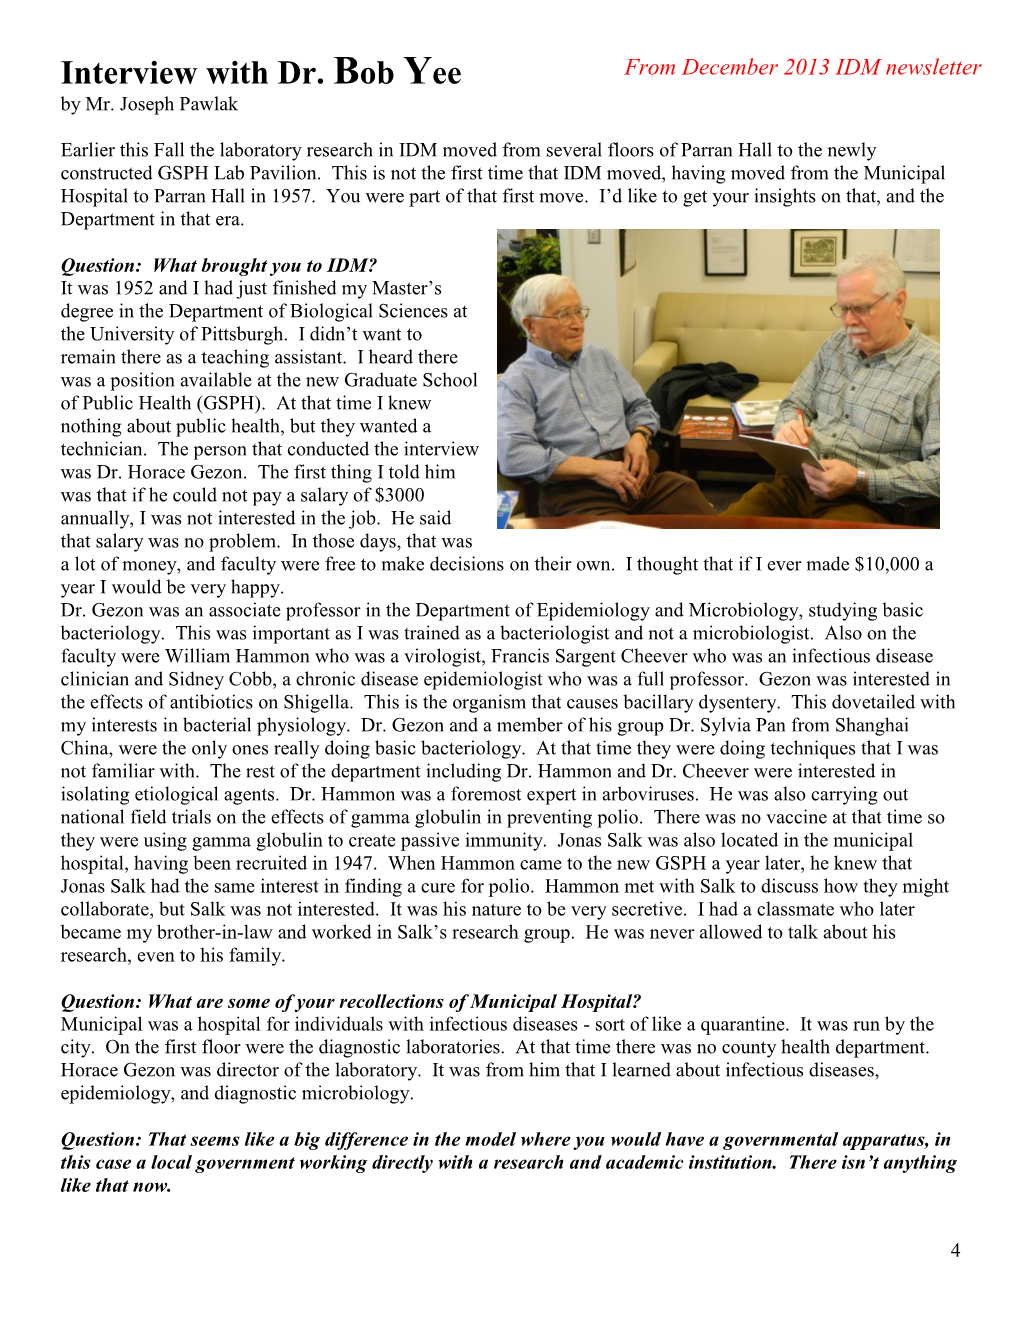 Interview with Dr. Bob Yee from December 2013 IDM Newsletter by Mr